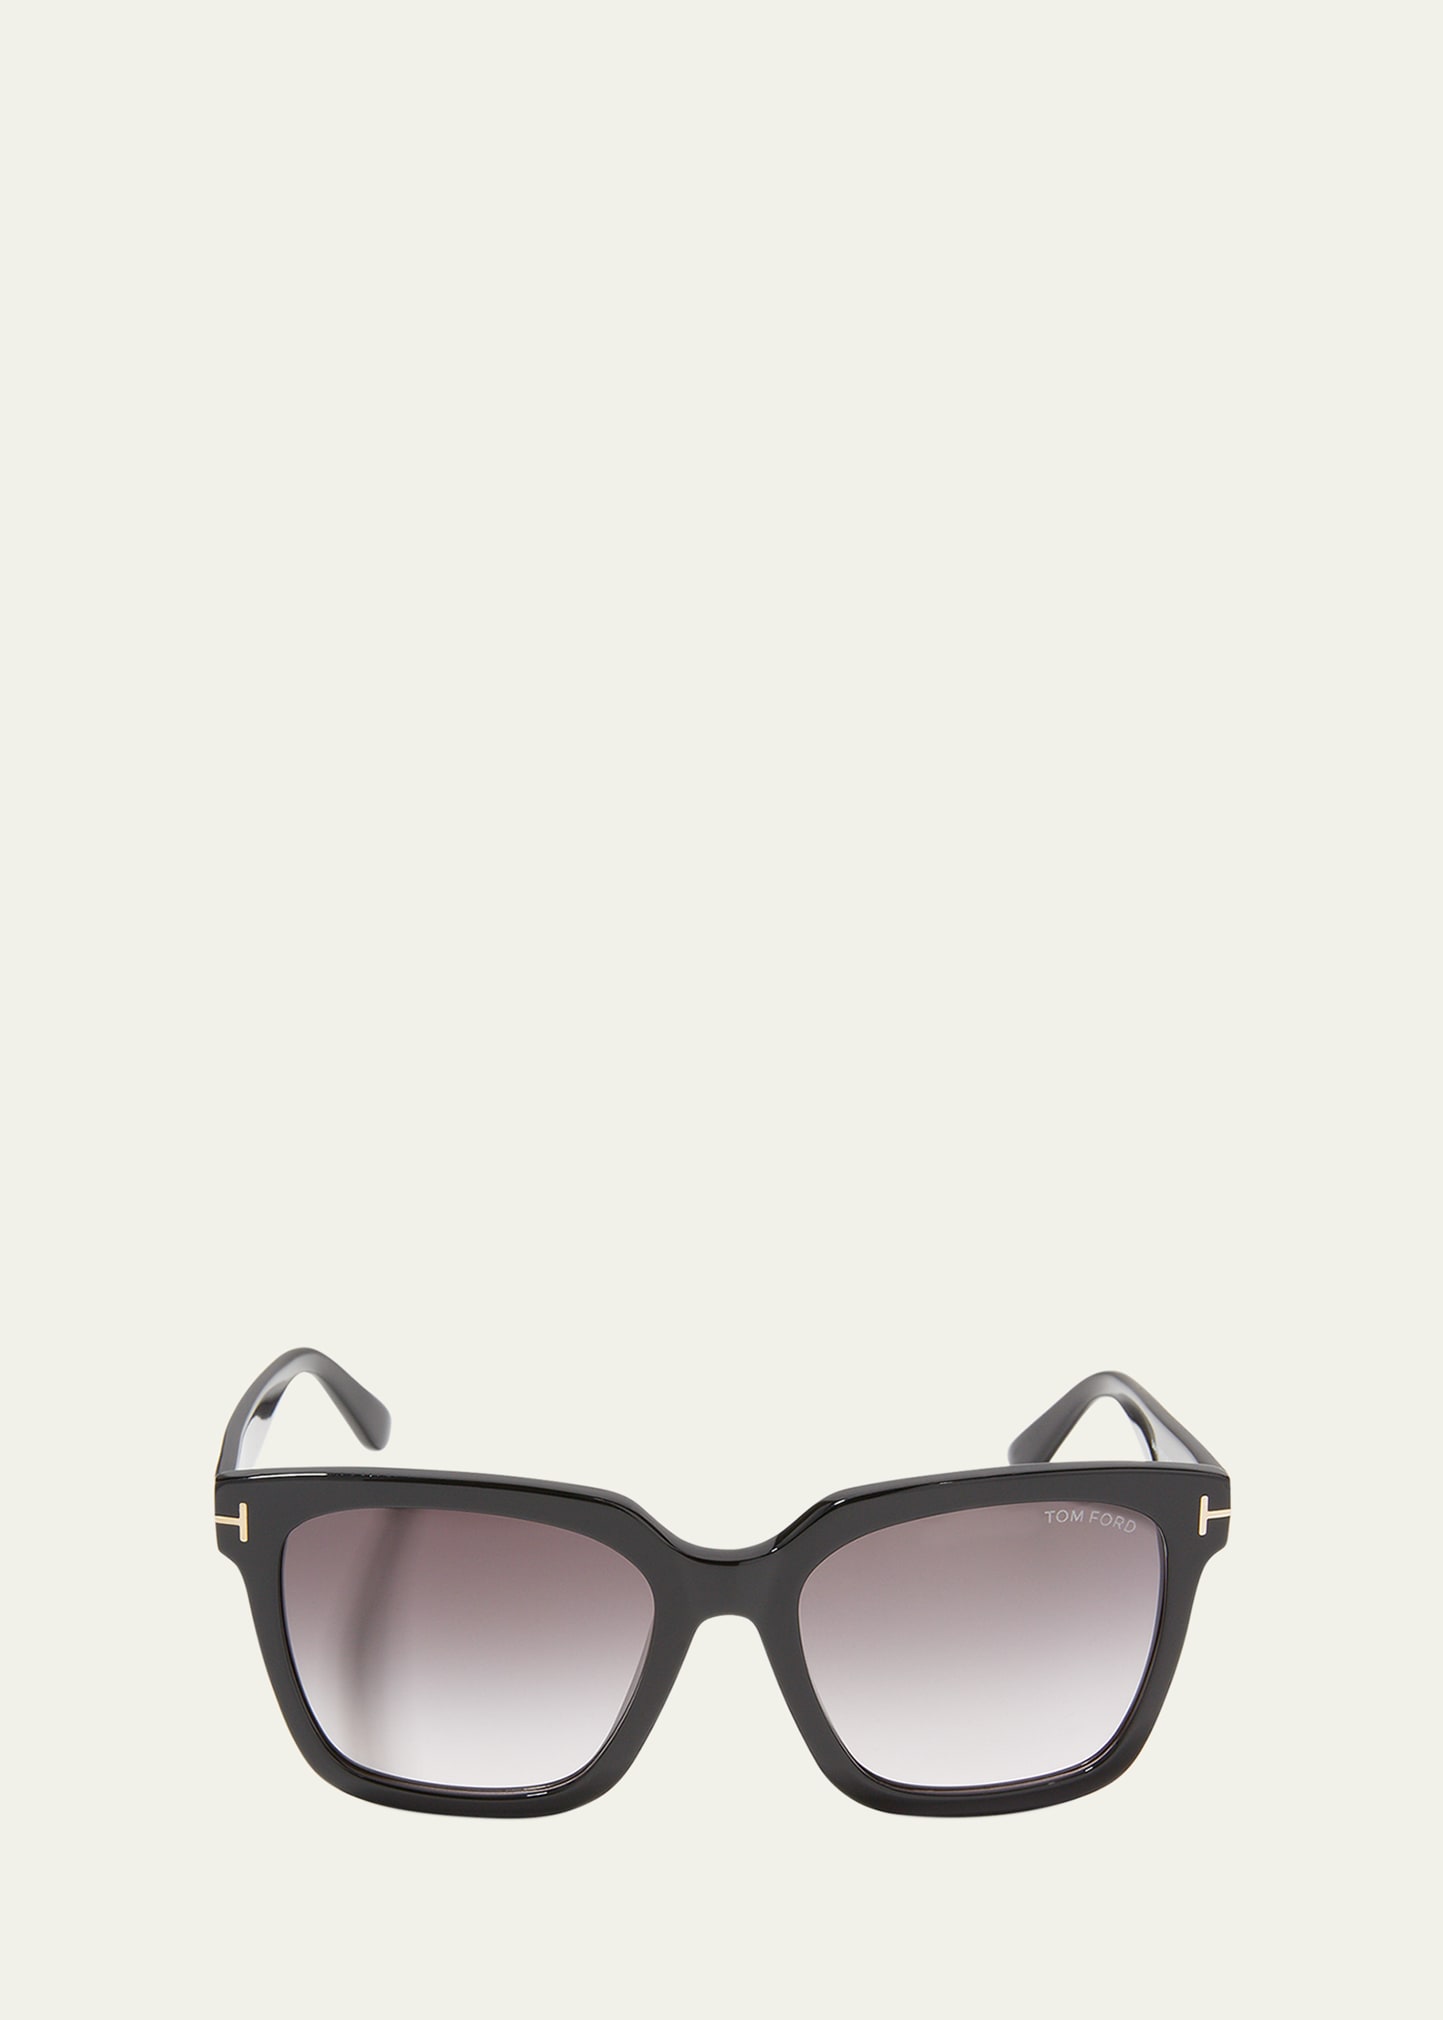 Tom Ford Selby Square Plastic Sunglasses In Black / Grey